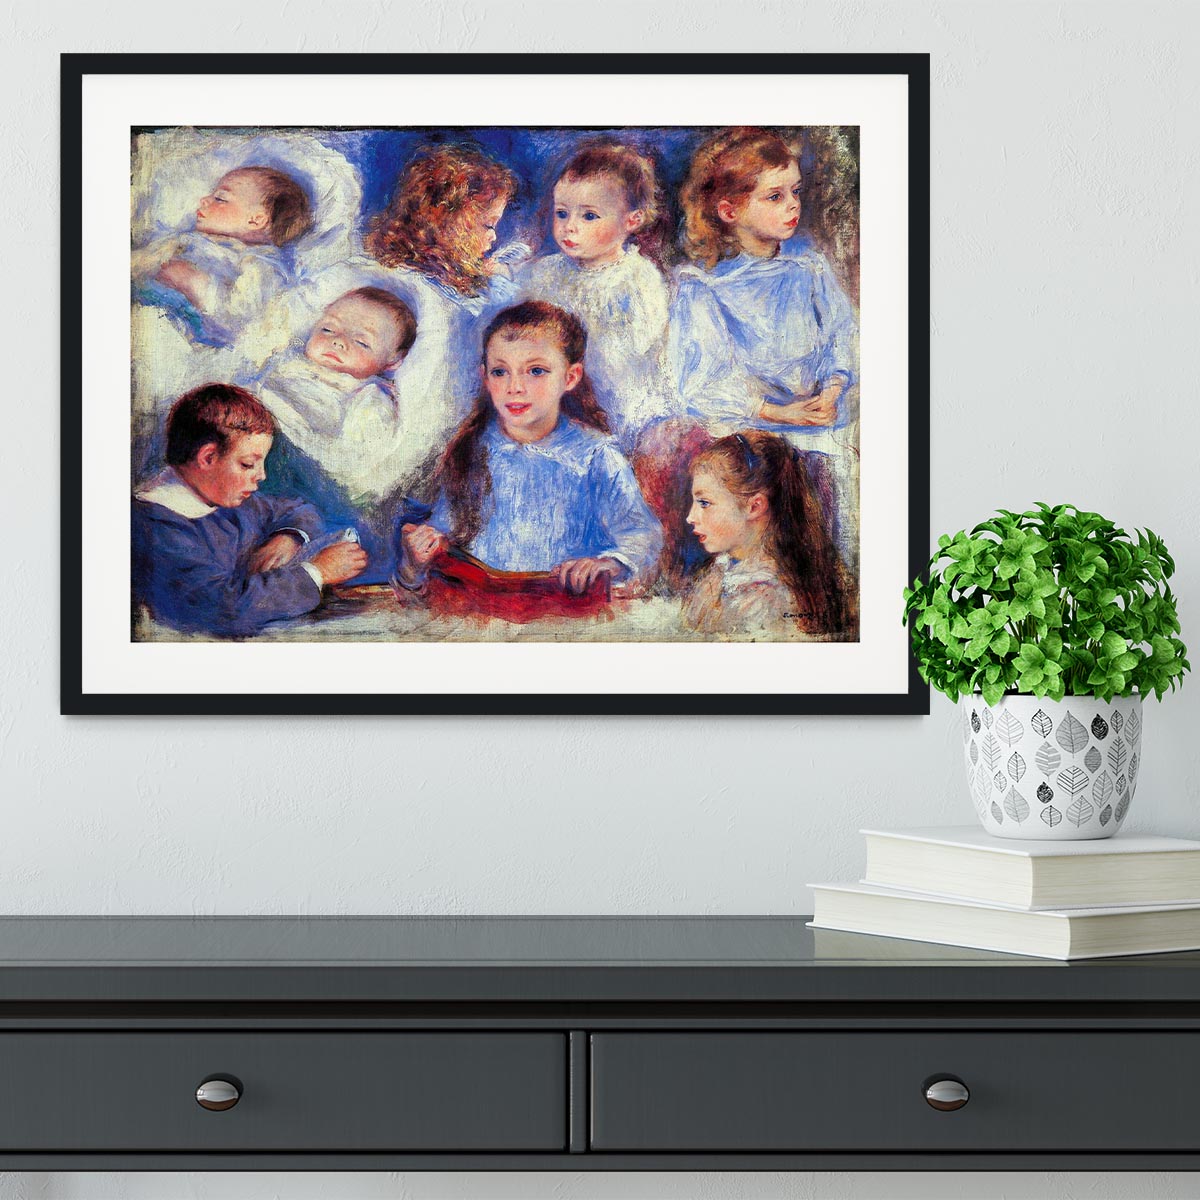 Images of childrens character heads by Renoir Framed Print - Canvas Art Rocks - 1